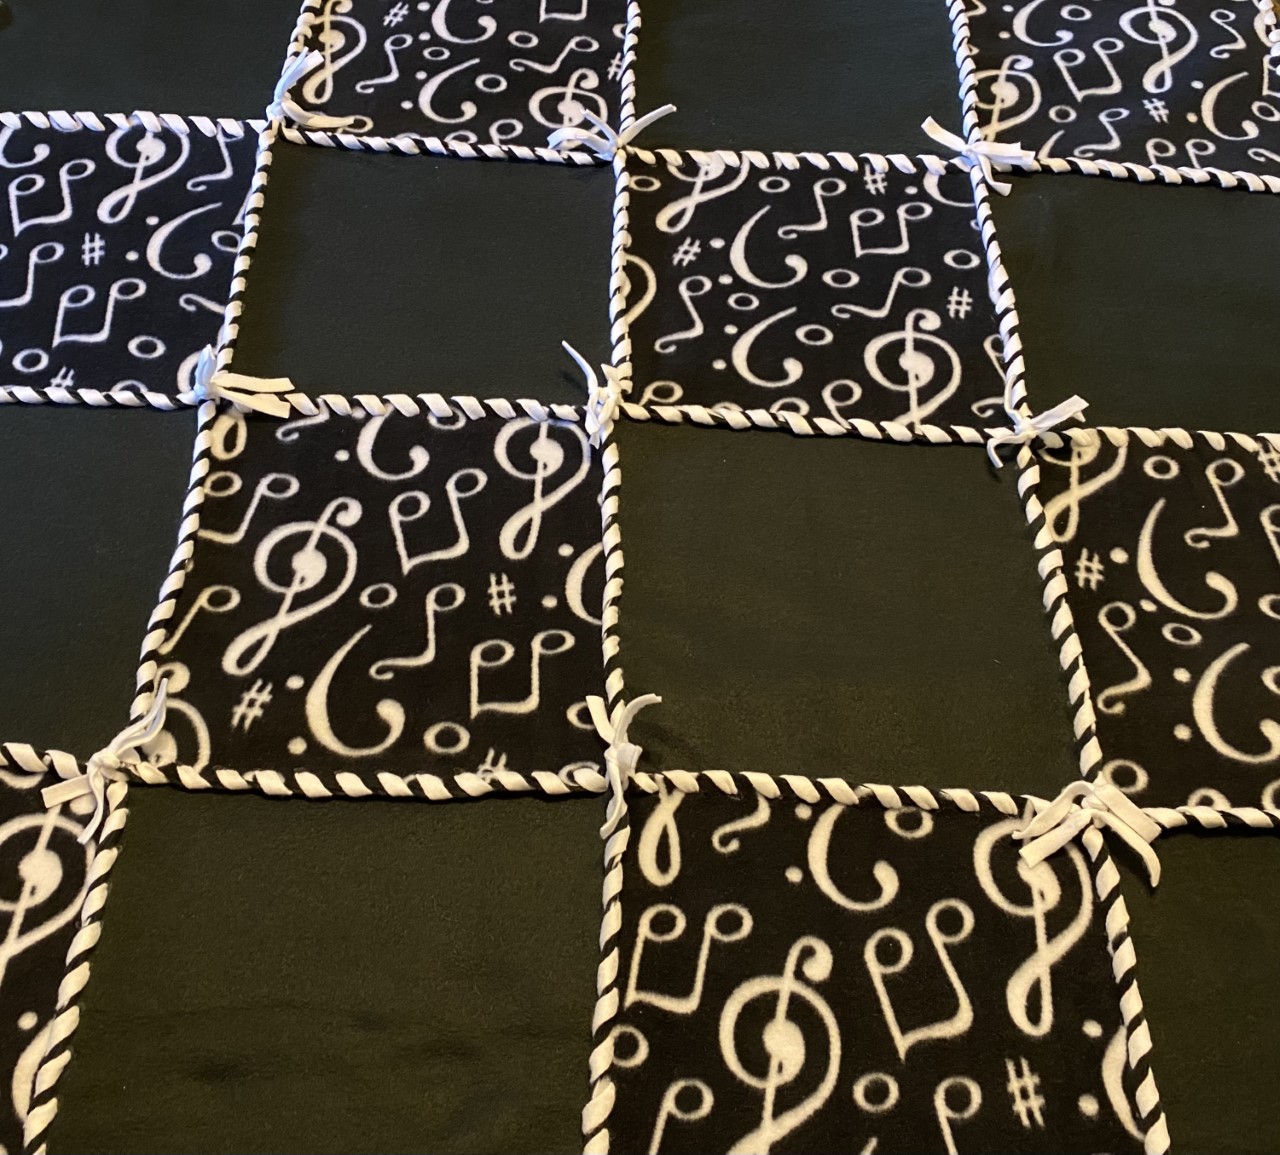 Fleece no sew 48 inch patchwork blanket with eight solid black fleece squares, alternated with eight black squares with white musical notes, woven together with white fleece ribbon